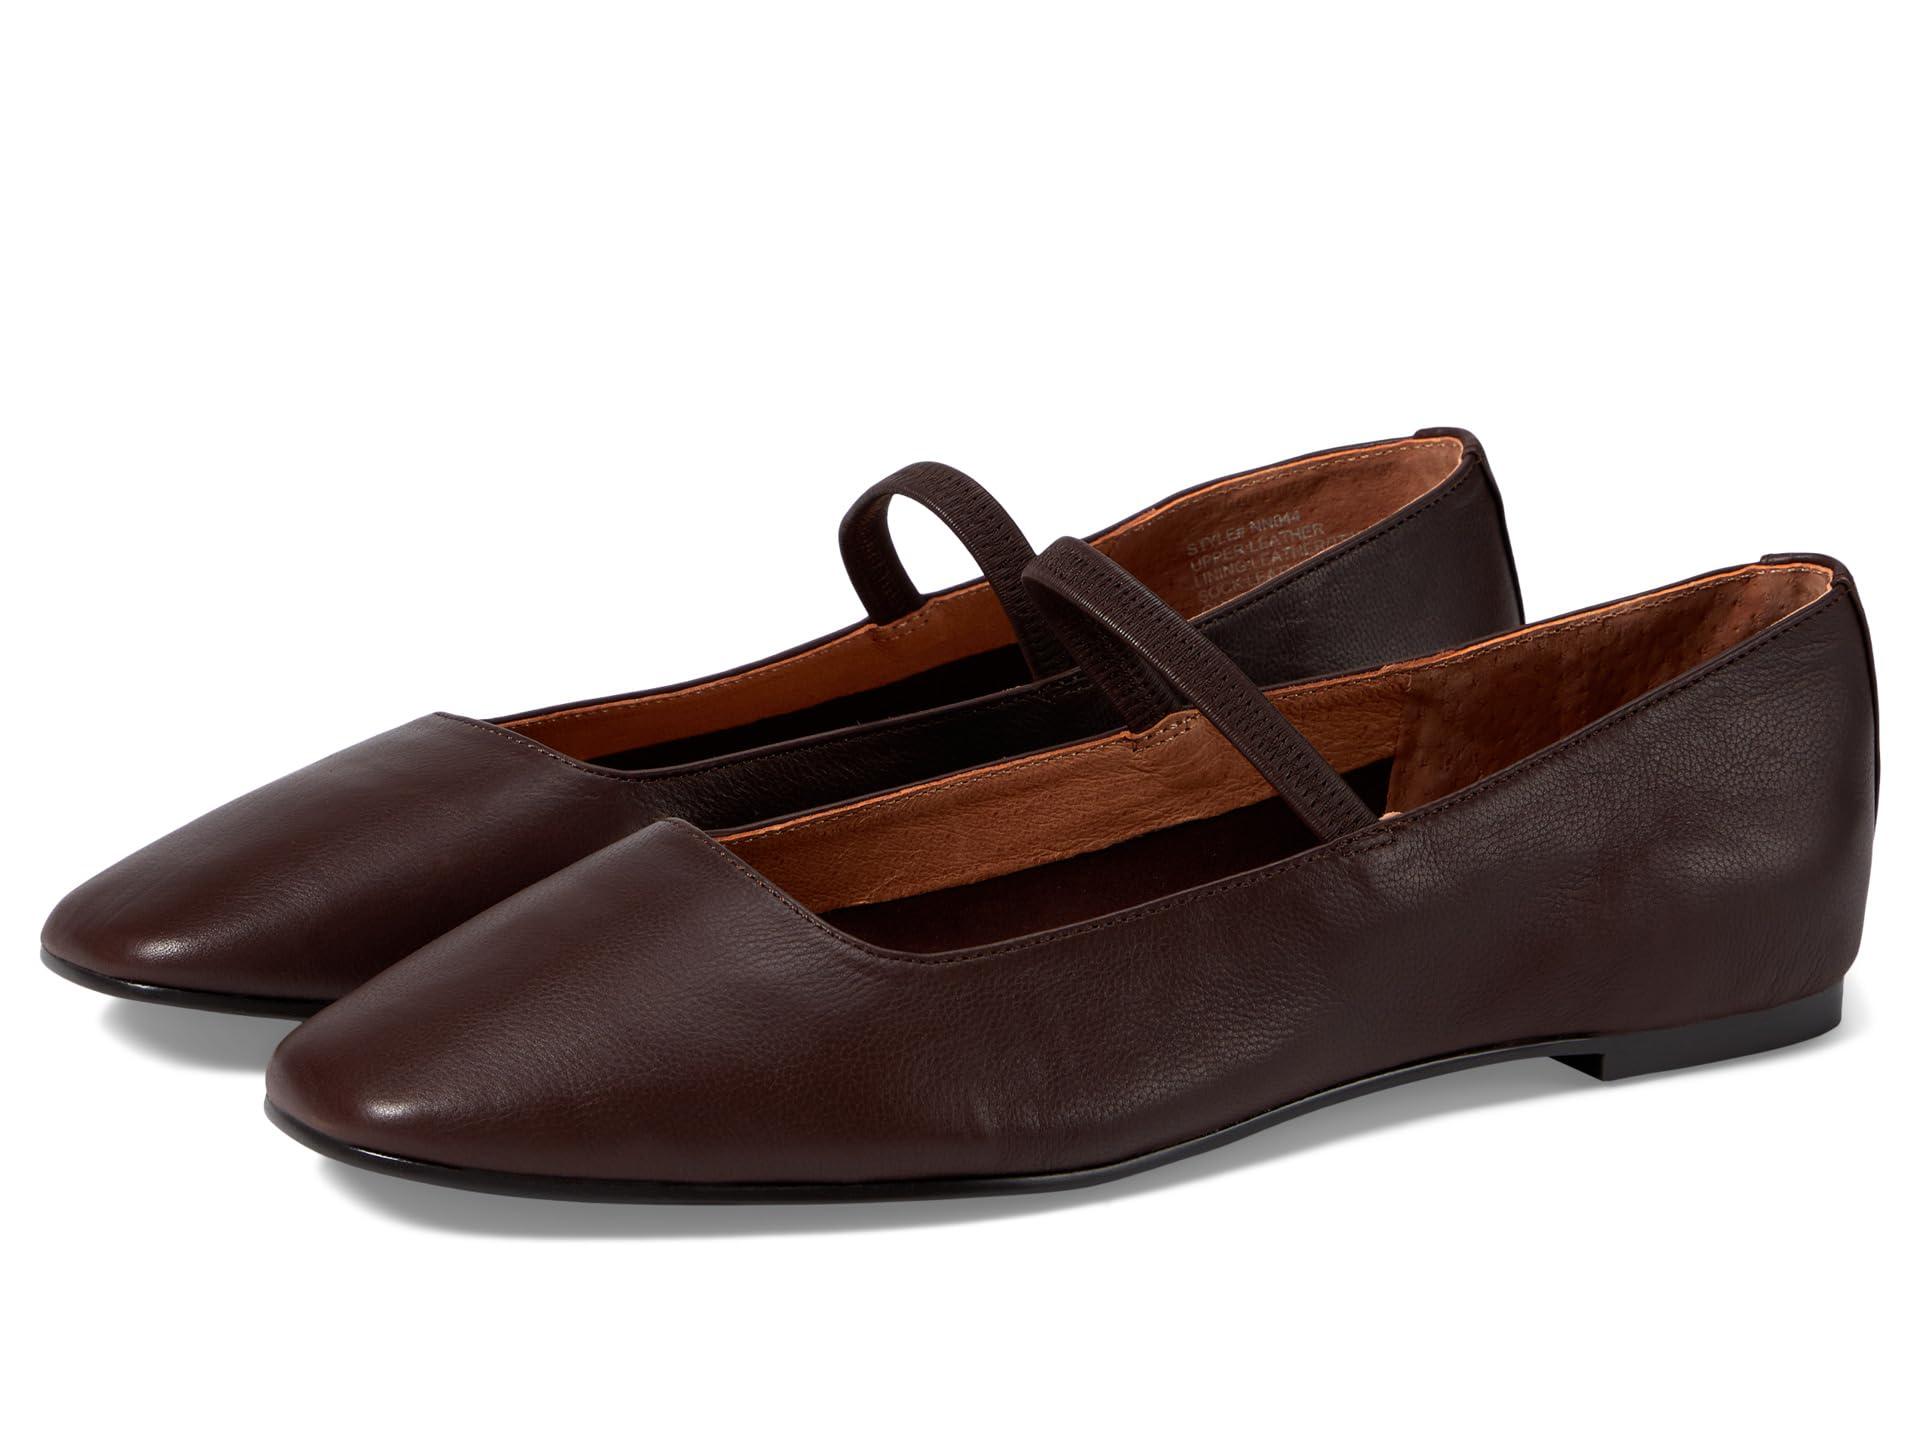 Madewell The Greta Ballet Flat in Brown | Lyst